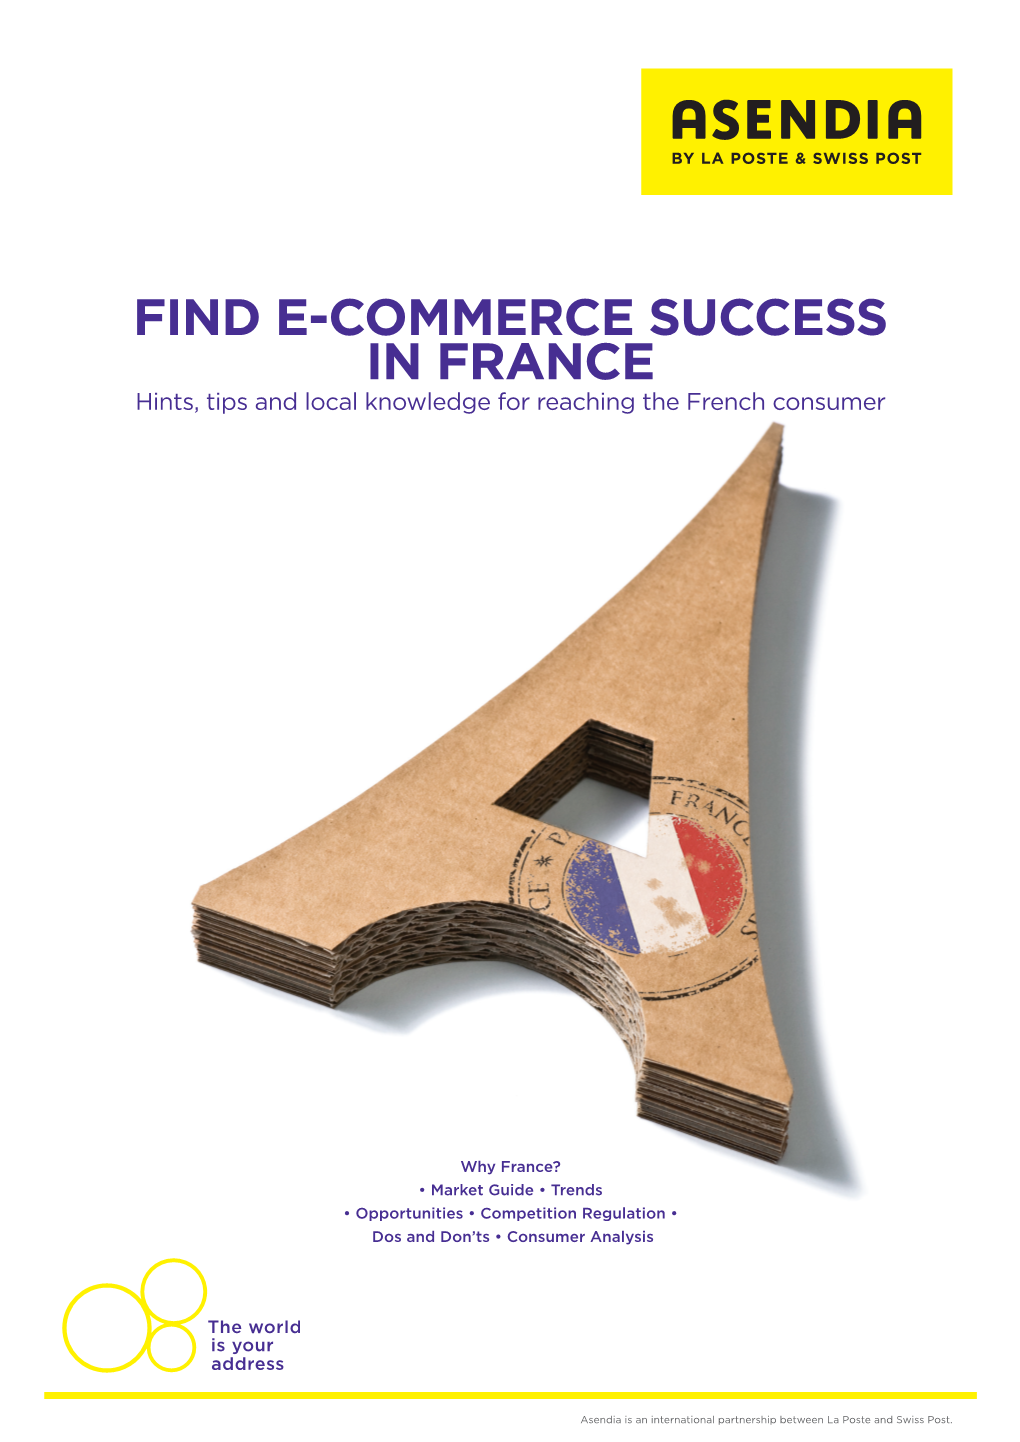 FIND E-COMMERCE SUCCESS in FRANCE Hints, Tips and Local Knowledge for Reaching the French Consumer